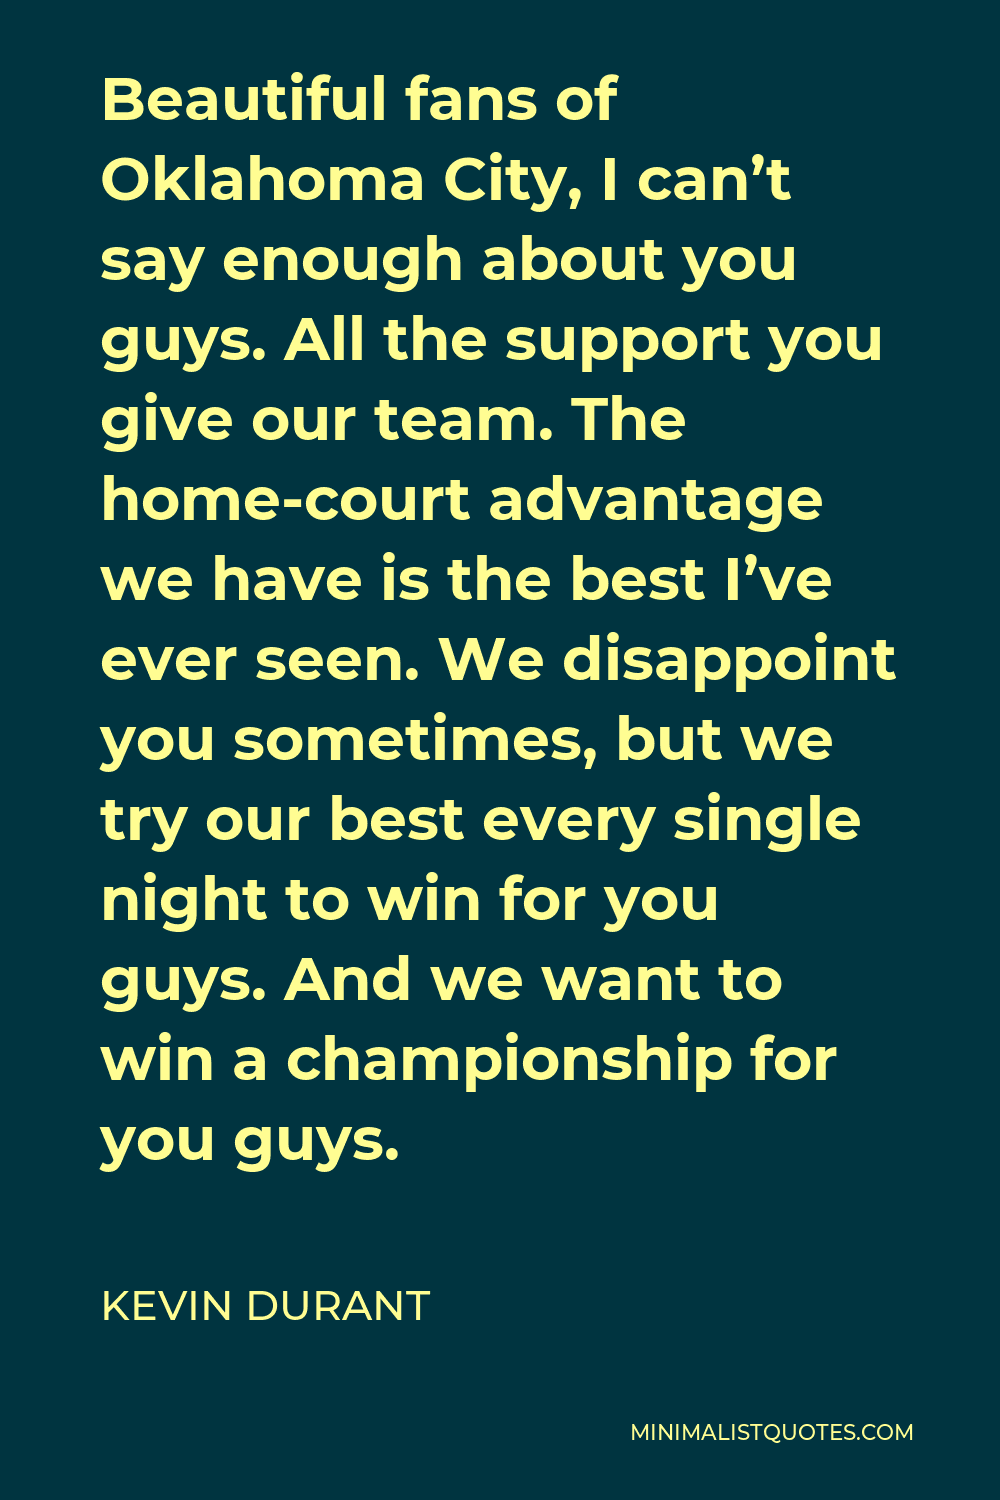 Kevin Durant Quote - Beautiful fans of Oklahoma City, I can’t say enough about you guys. All the support you give our team. The home-court advantage we have is the best I’ve ever seen. We disappoint you sometimes, but we try our best every single night to win for you guys. And we want to win a championship for you guys.